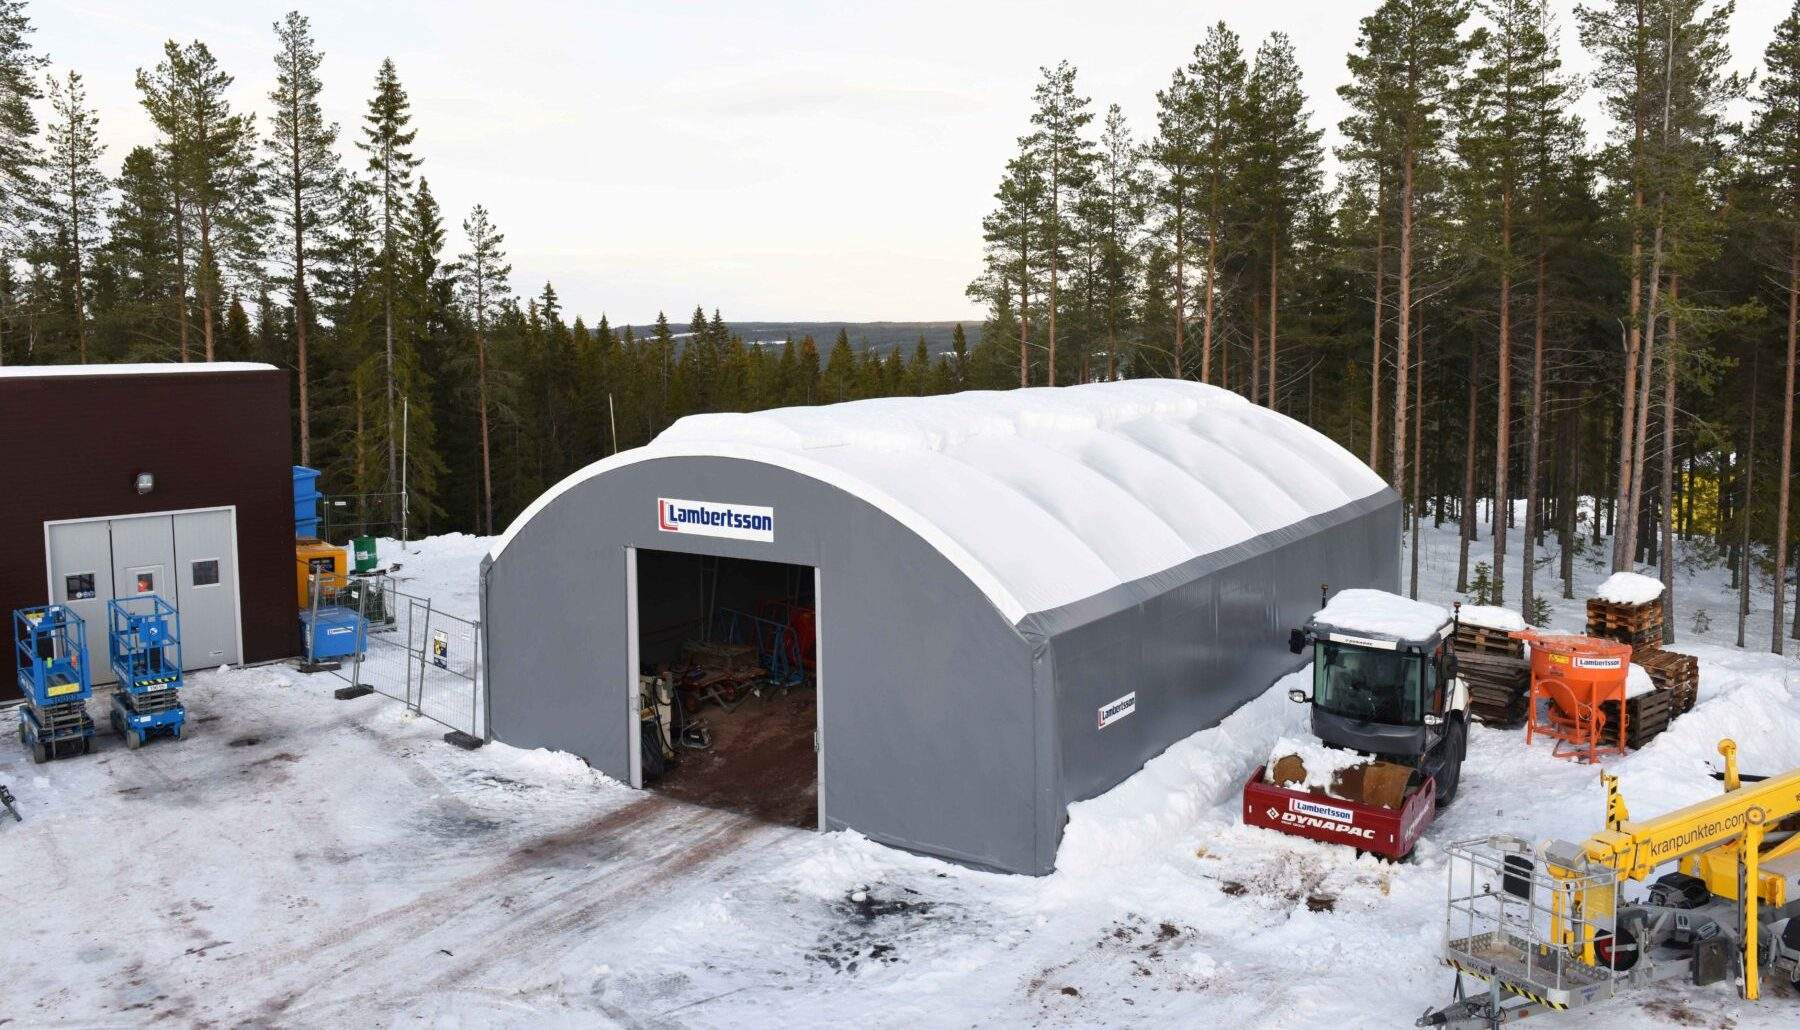 Campaign hall in Sälen - simple building hall that is used to store machines (machine storage) and storage tents